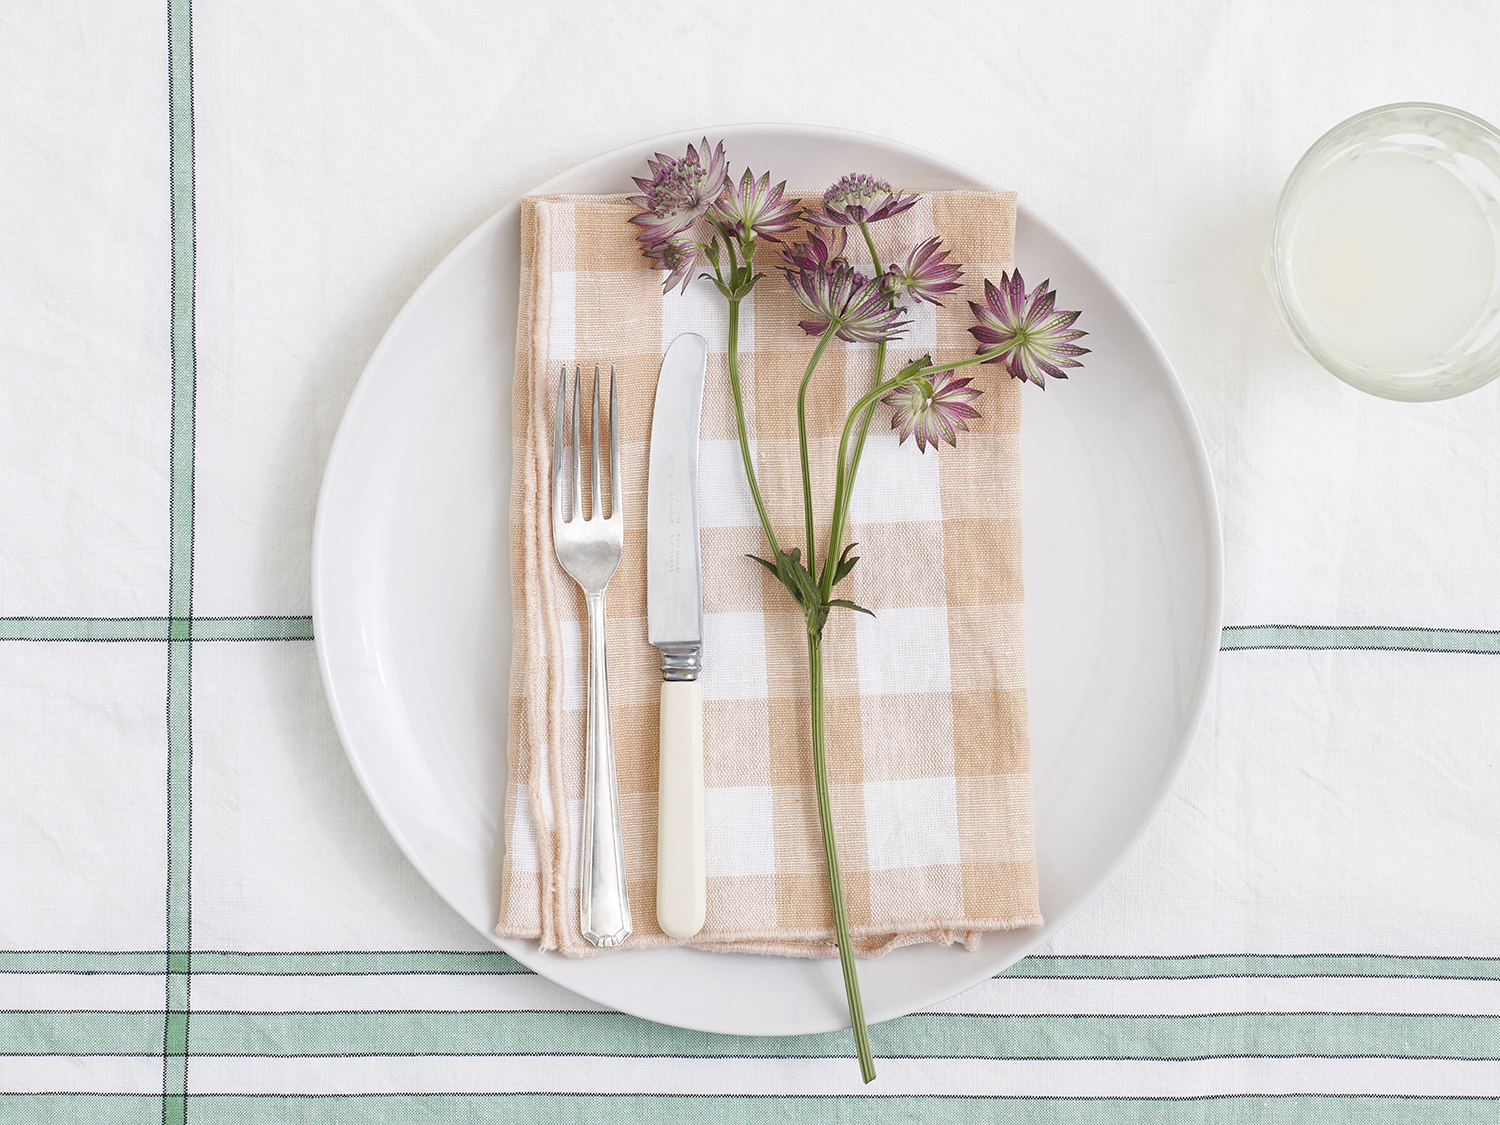 Spring flower styling and indie homeware products